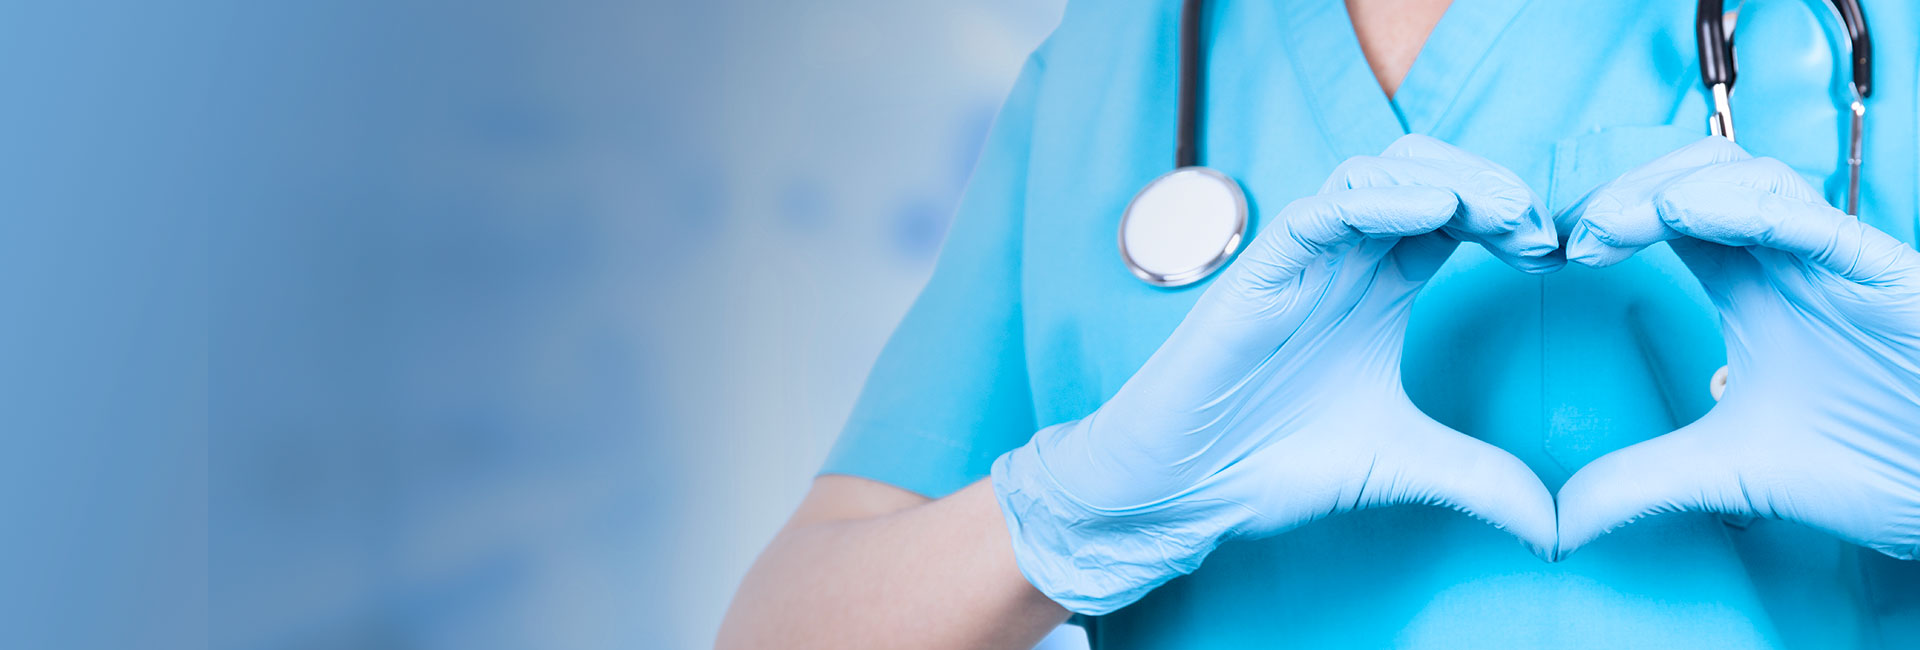 Nurse wearing blue gloves holding her hands in the shape of a heart.